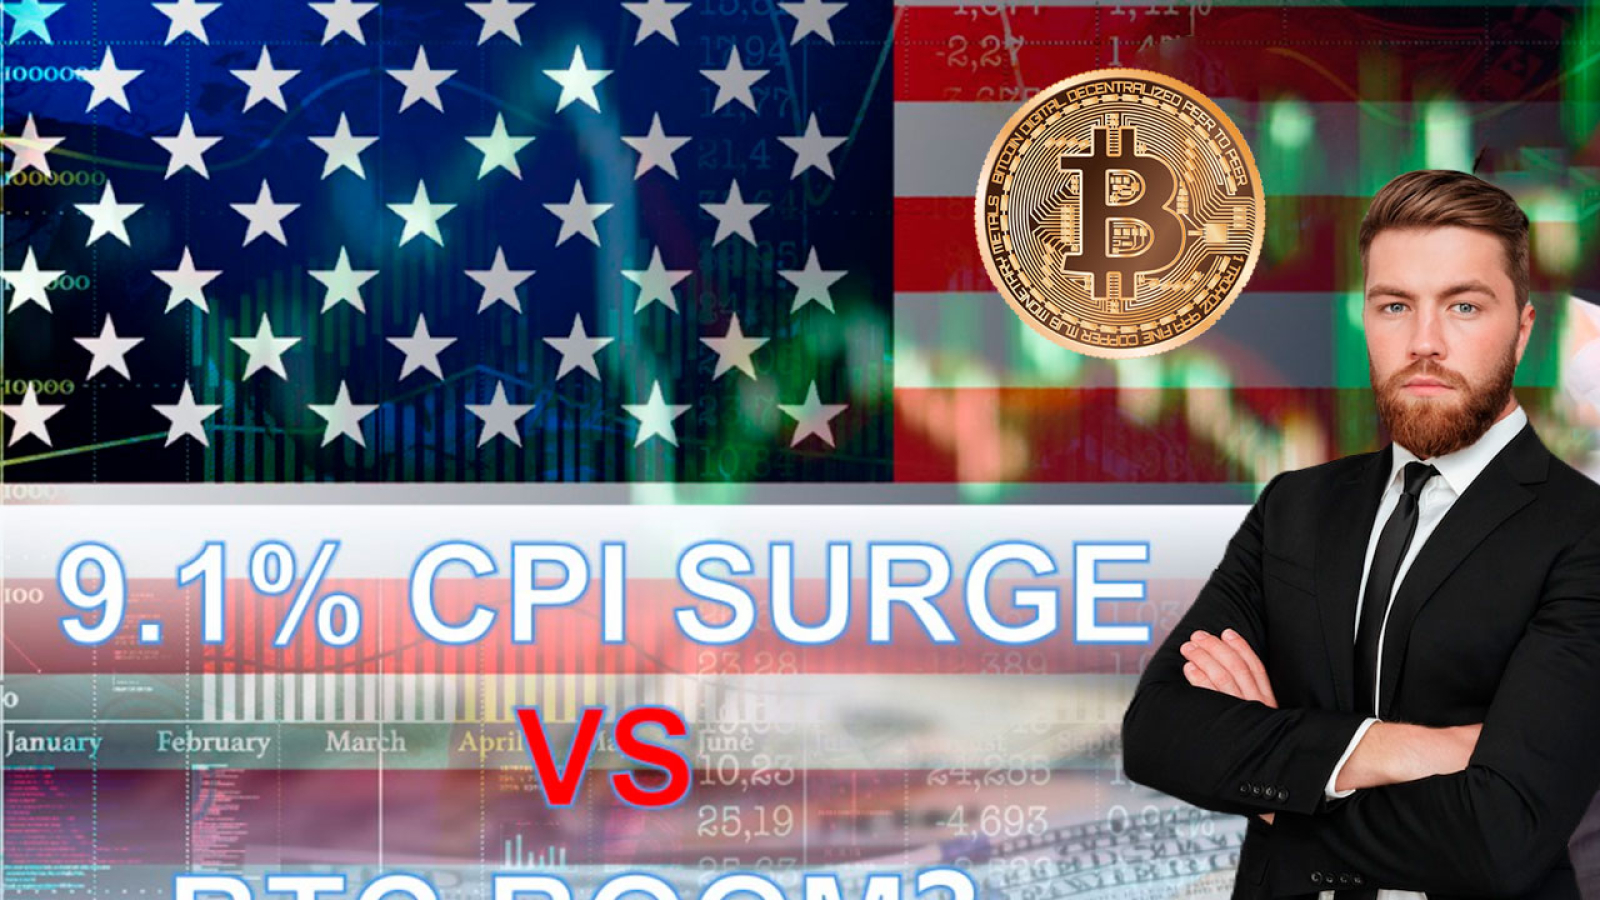 9.1% Inflation Rate Leap & BTC Price Jump - How One Might Seize the Chance to Profit?